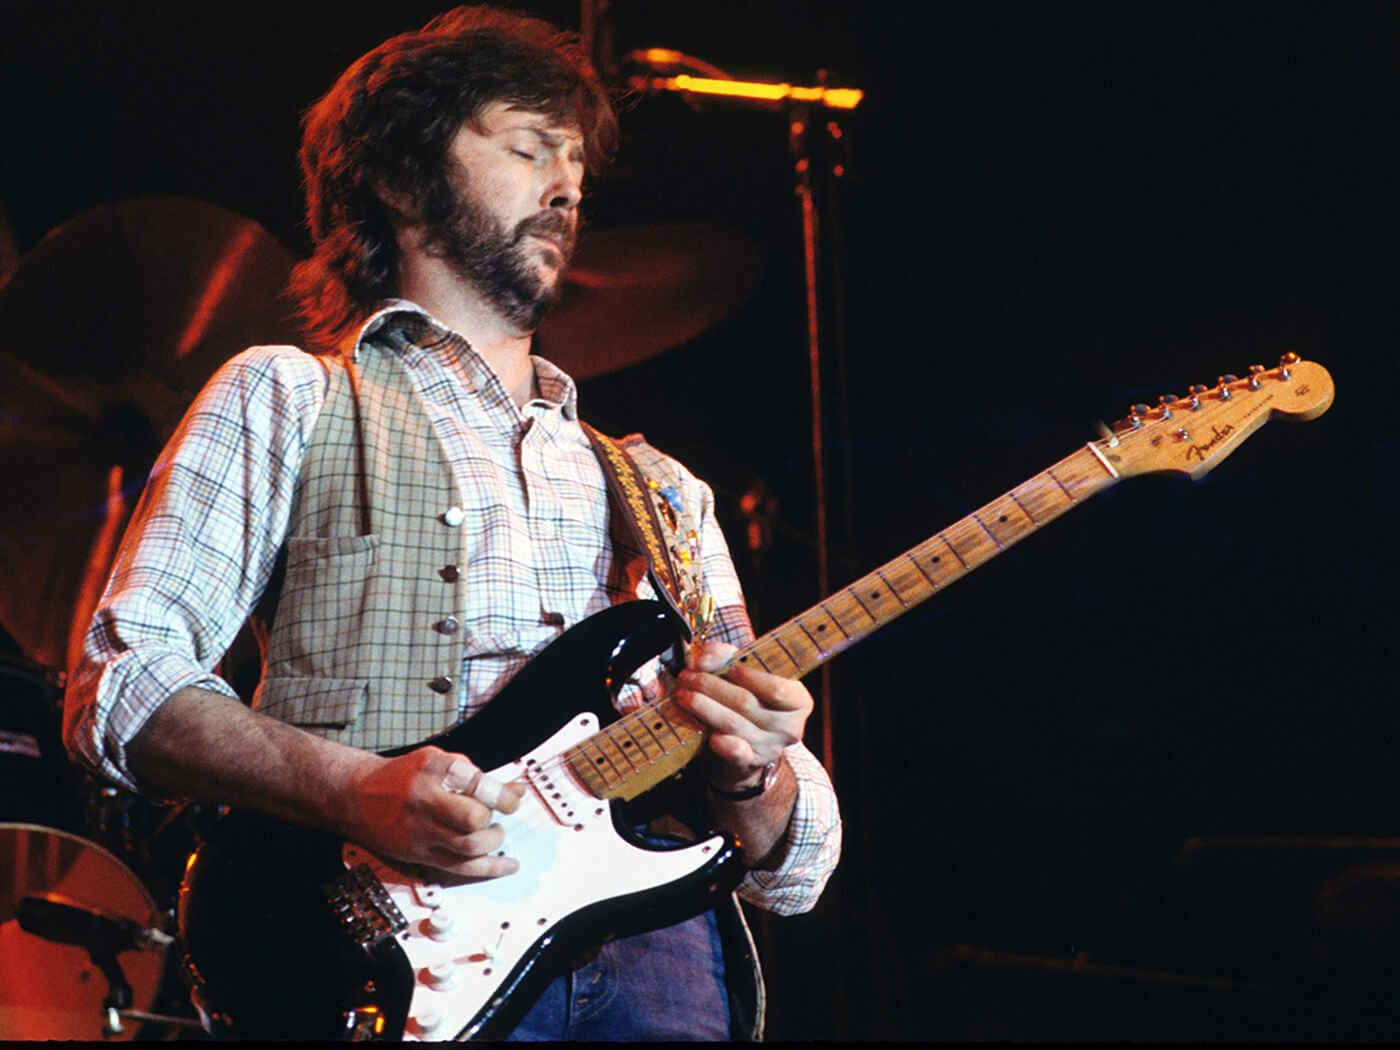 Eric Clapton performing with his “Blackie” Fender Stratocaster, photo by Richard E. Aaron/Redferns via Getty Images